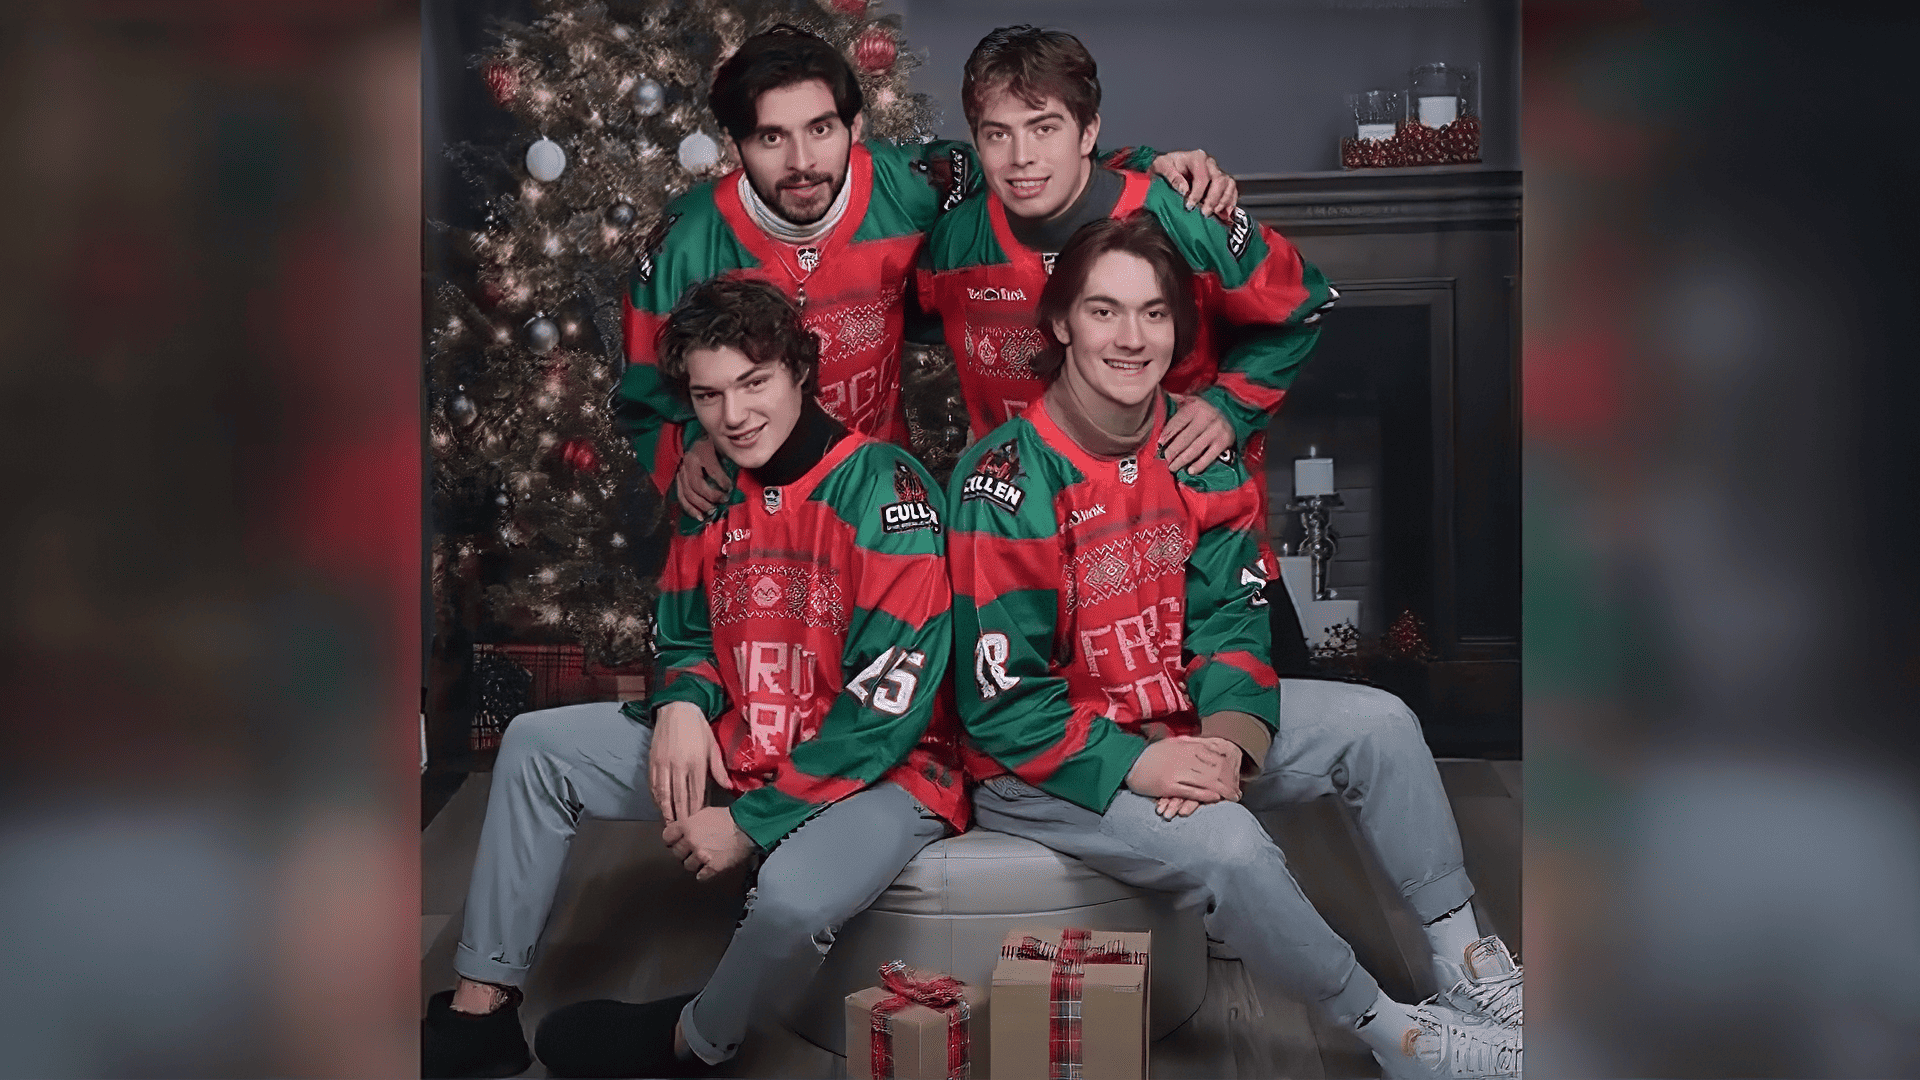 Fargo Force posing in front of Christmas tree wearing Christmas sweater-themed jerseys